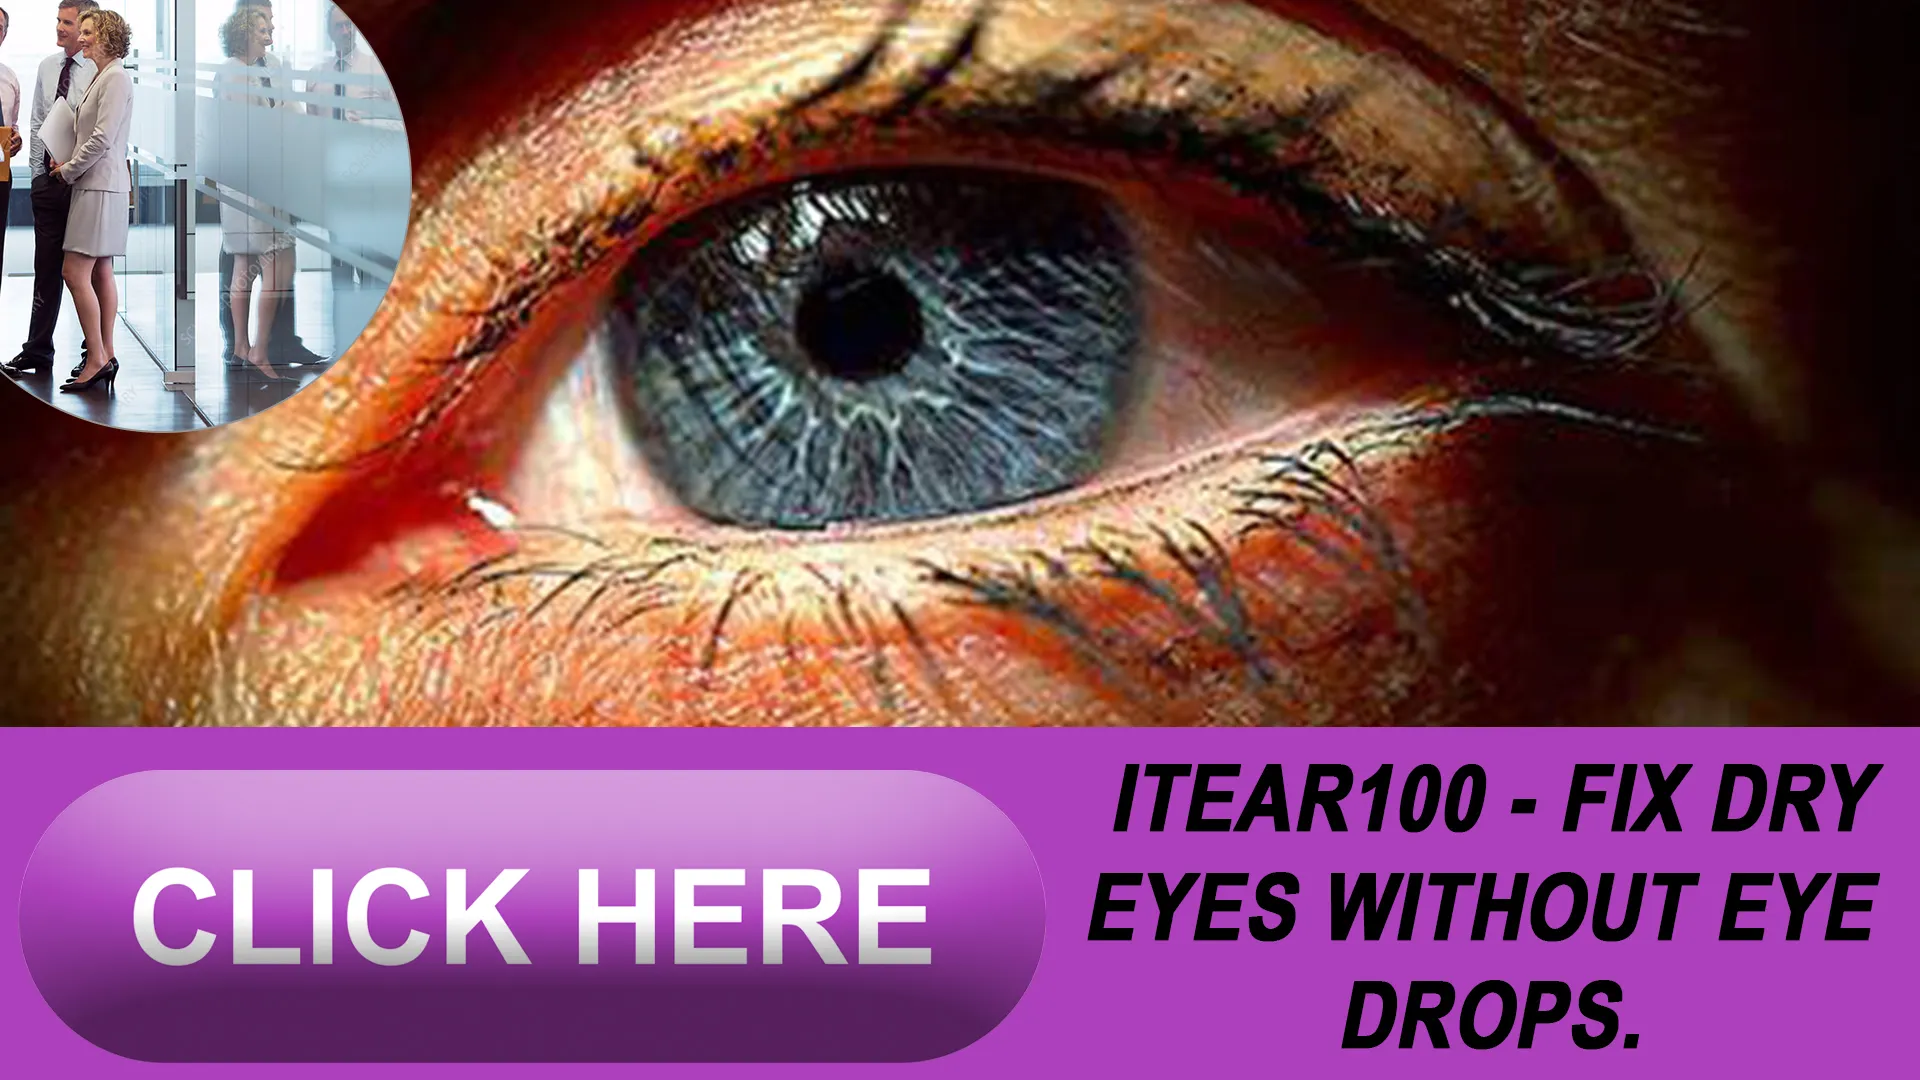 Tearing Up the Misconceptions: The Safety and Science of iTEAR100